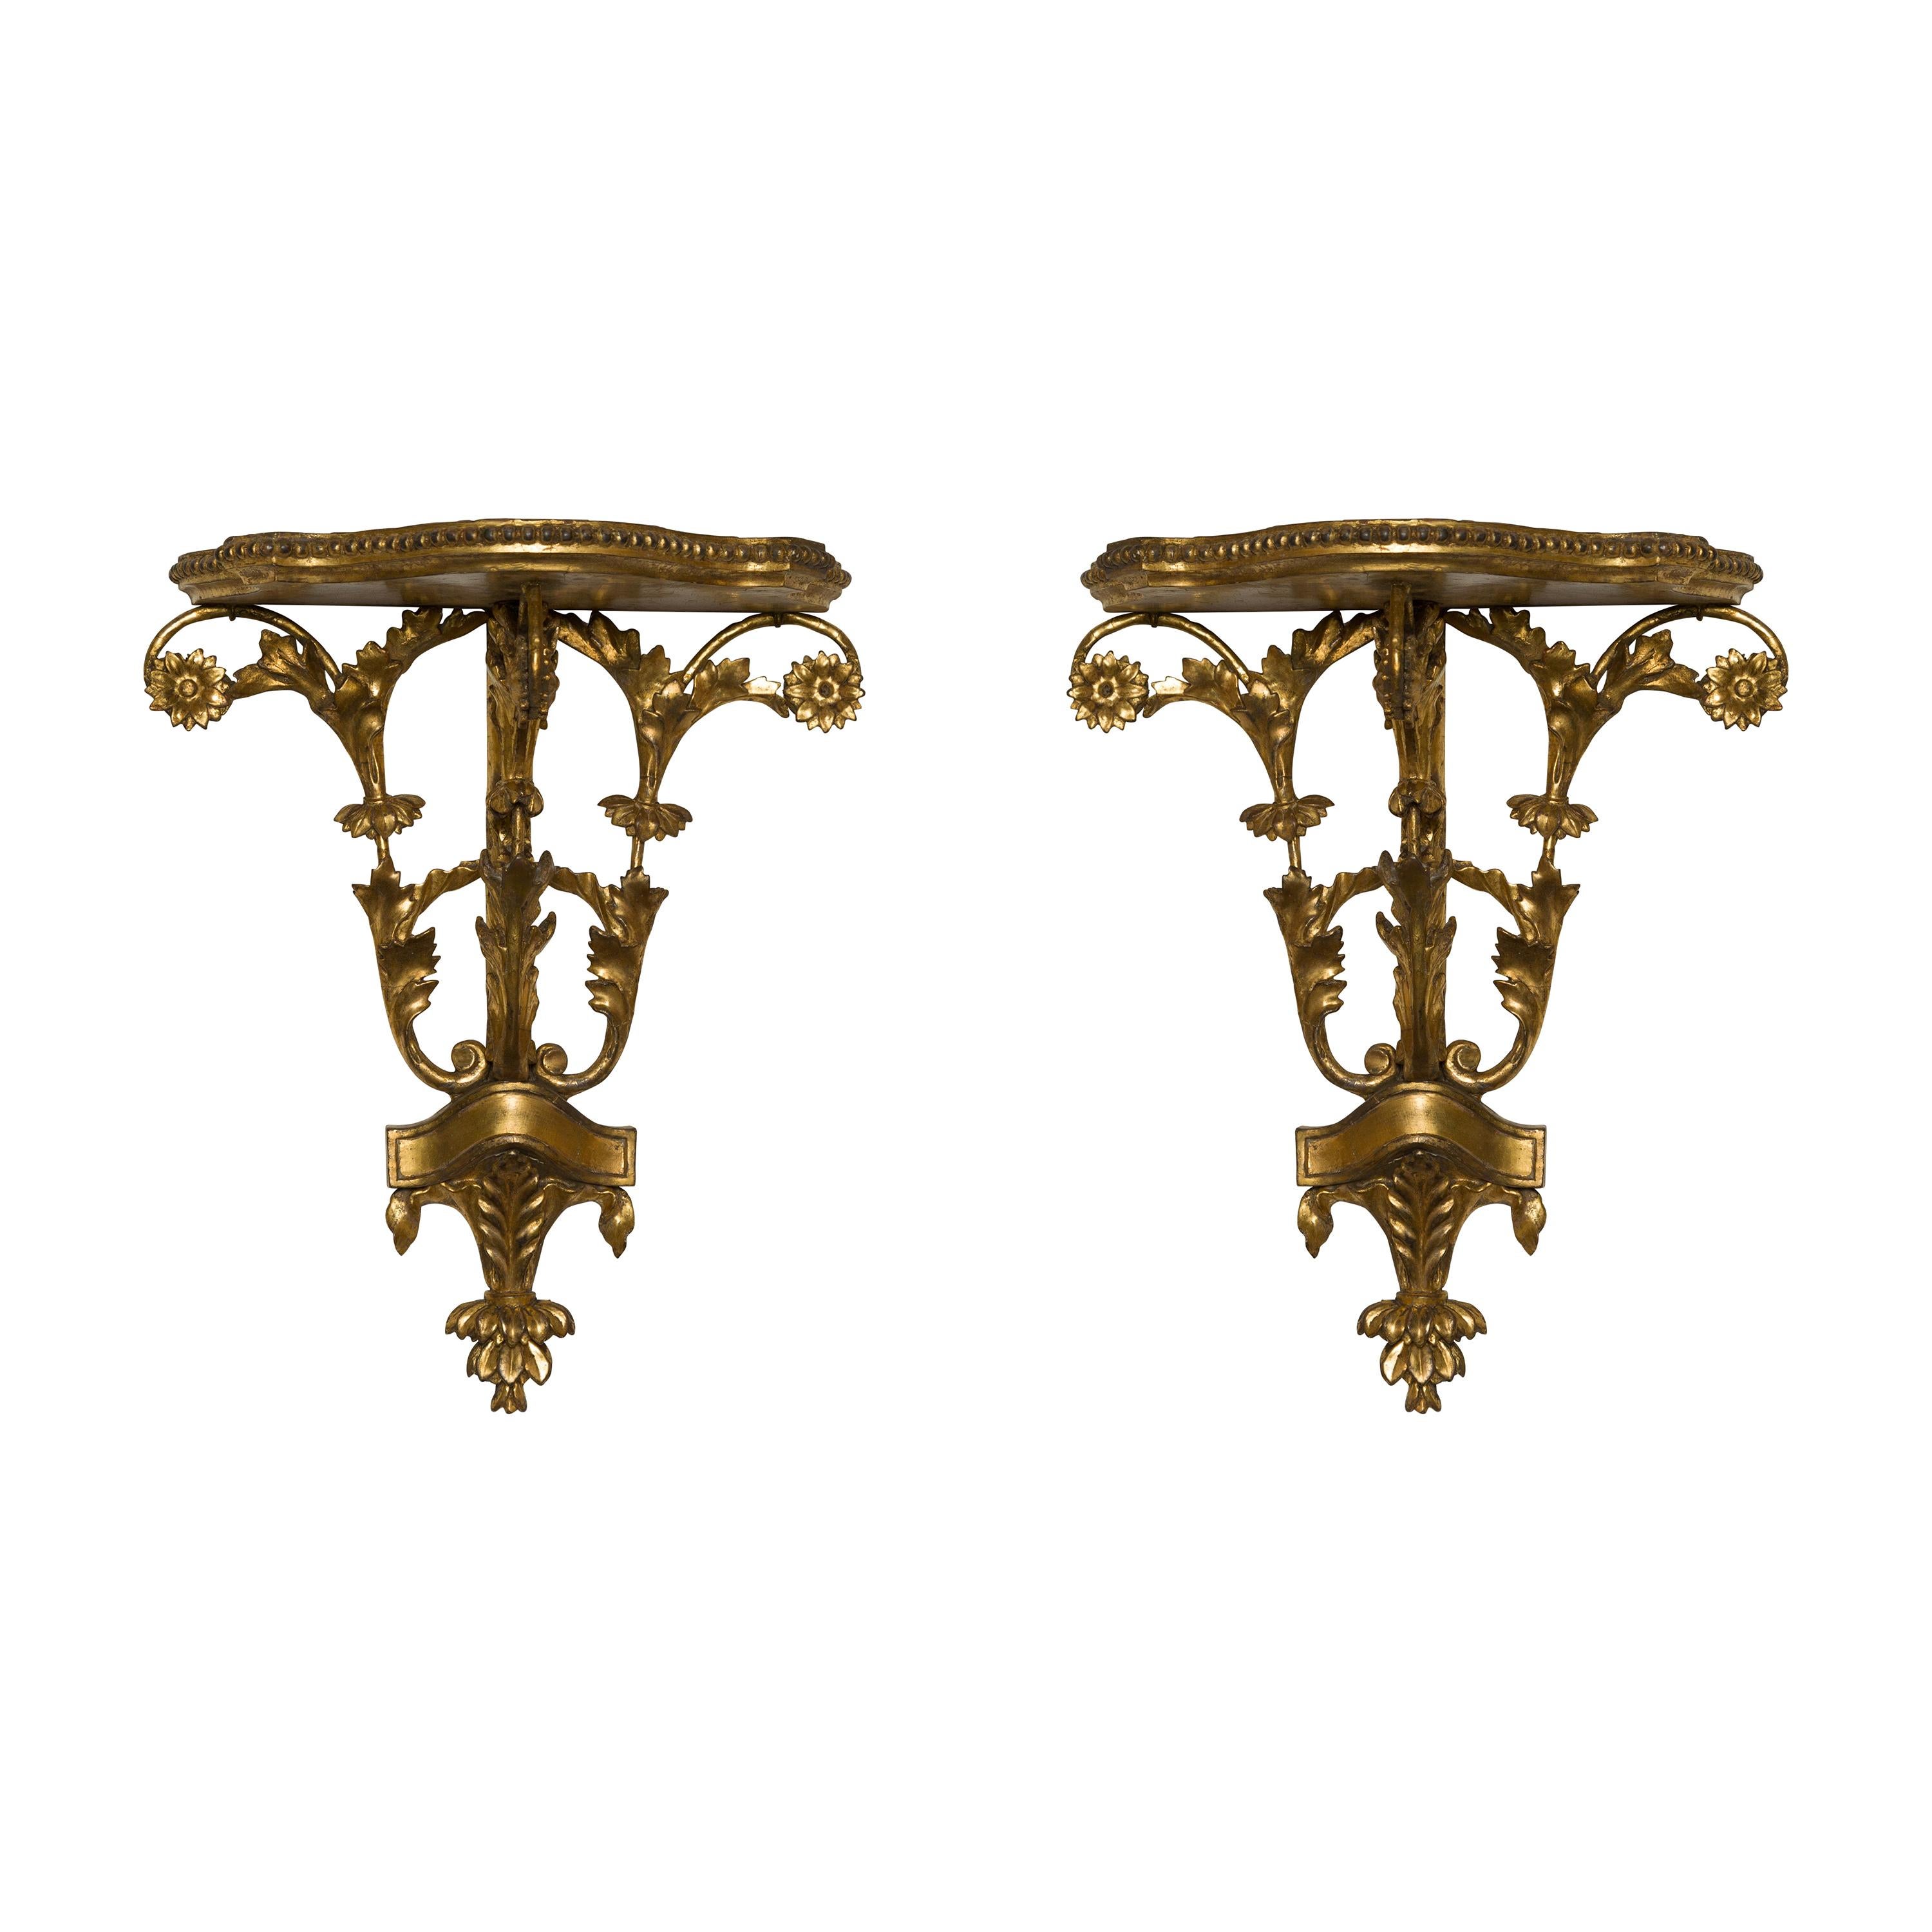 Pair of English 19th Century Carved Giltwood Brackets with Foliage and Flowers